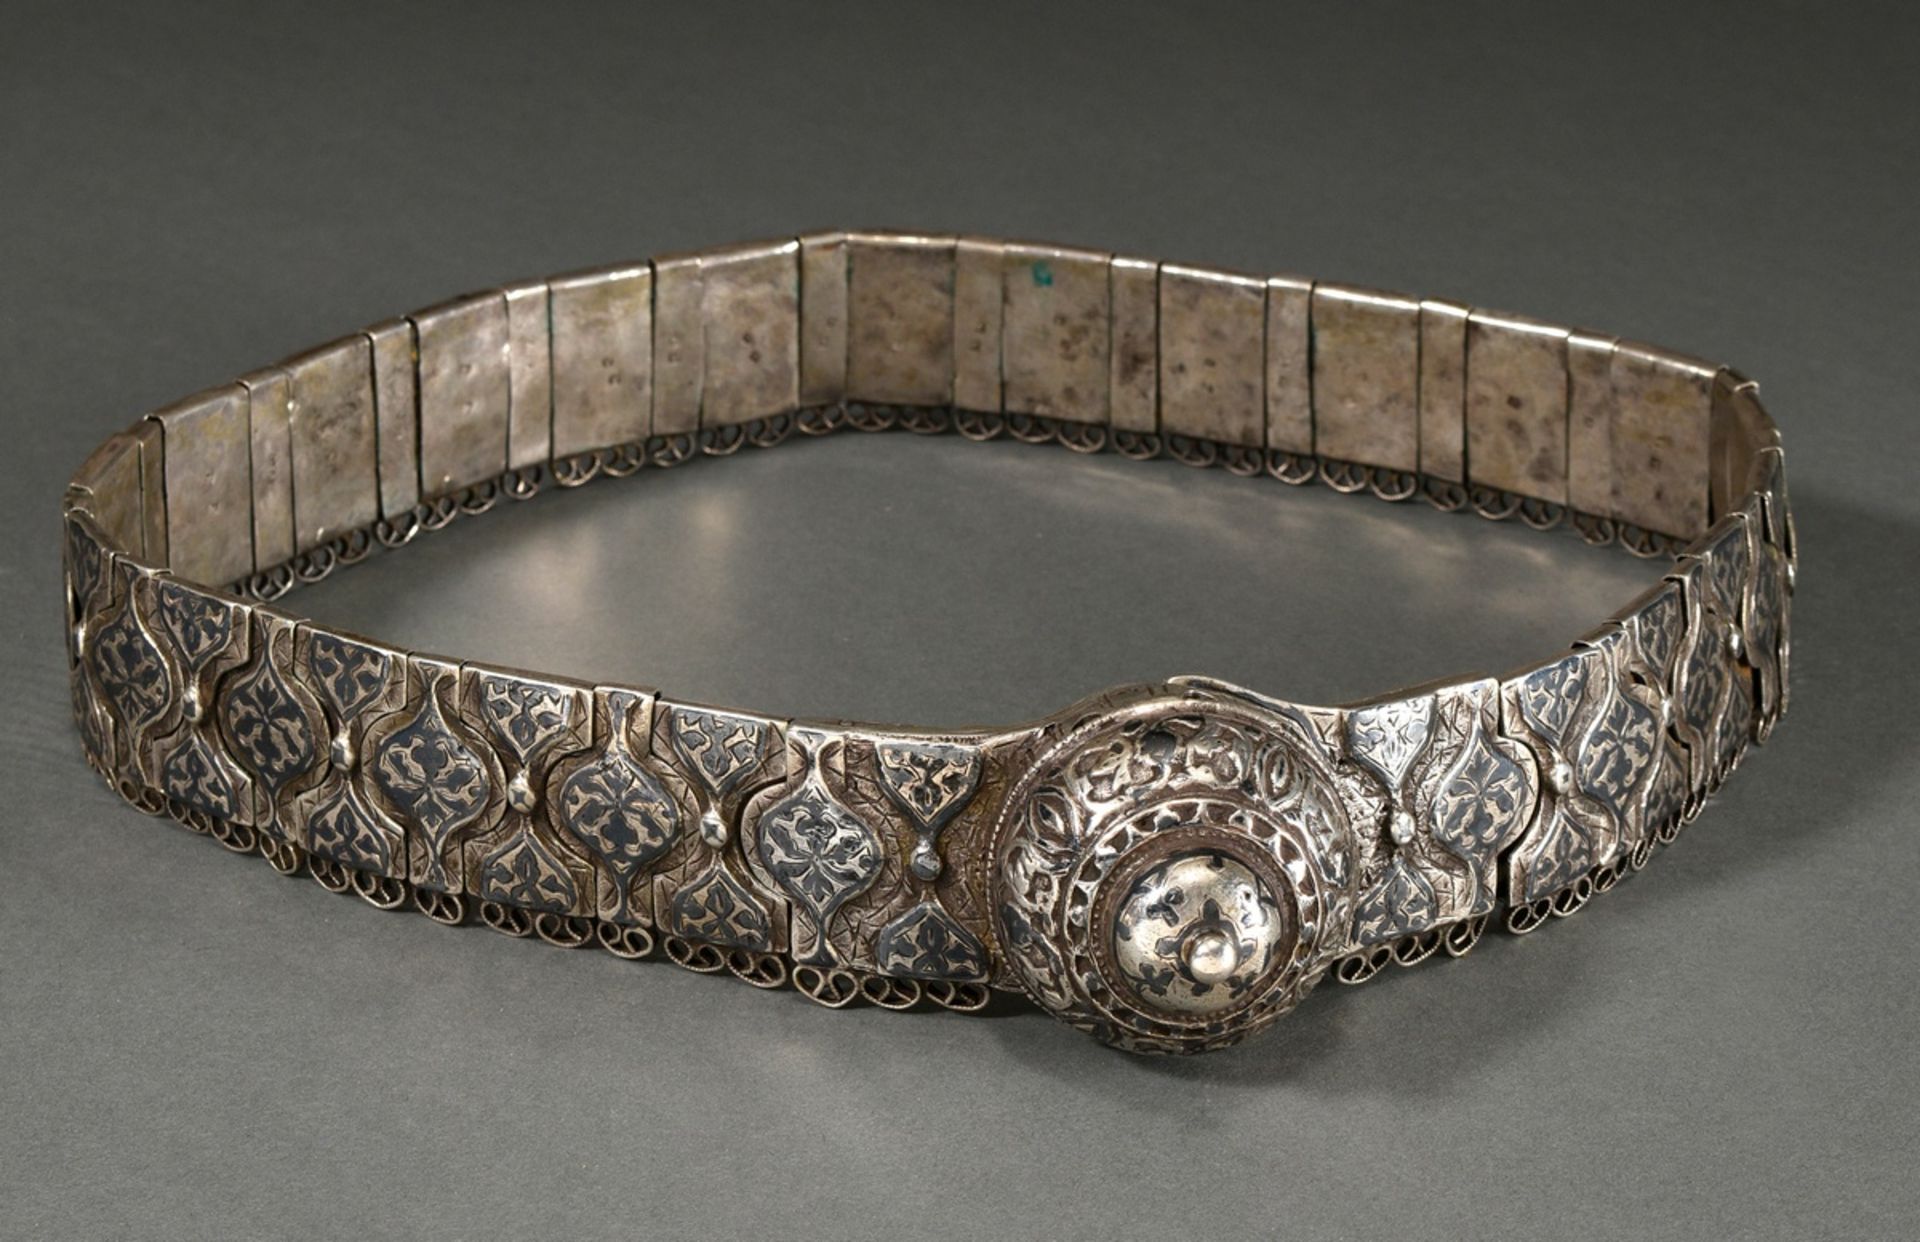 Caucasian women's belt with tendril decoration in niello work and fine chasing, soldered wire loops